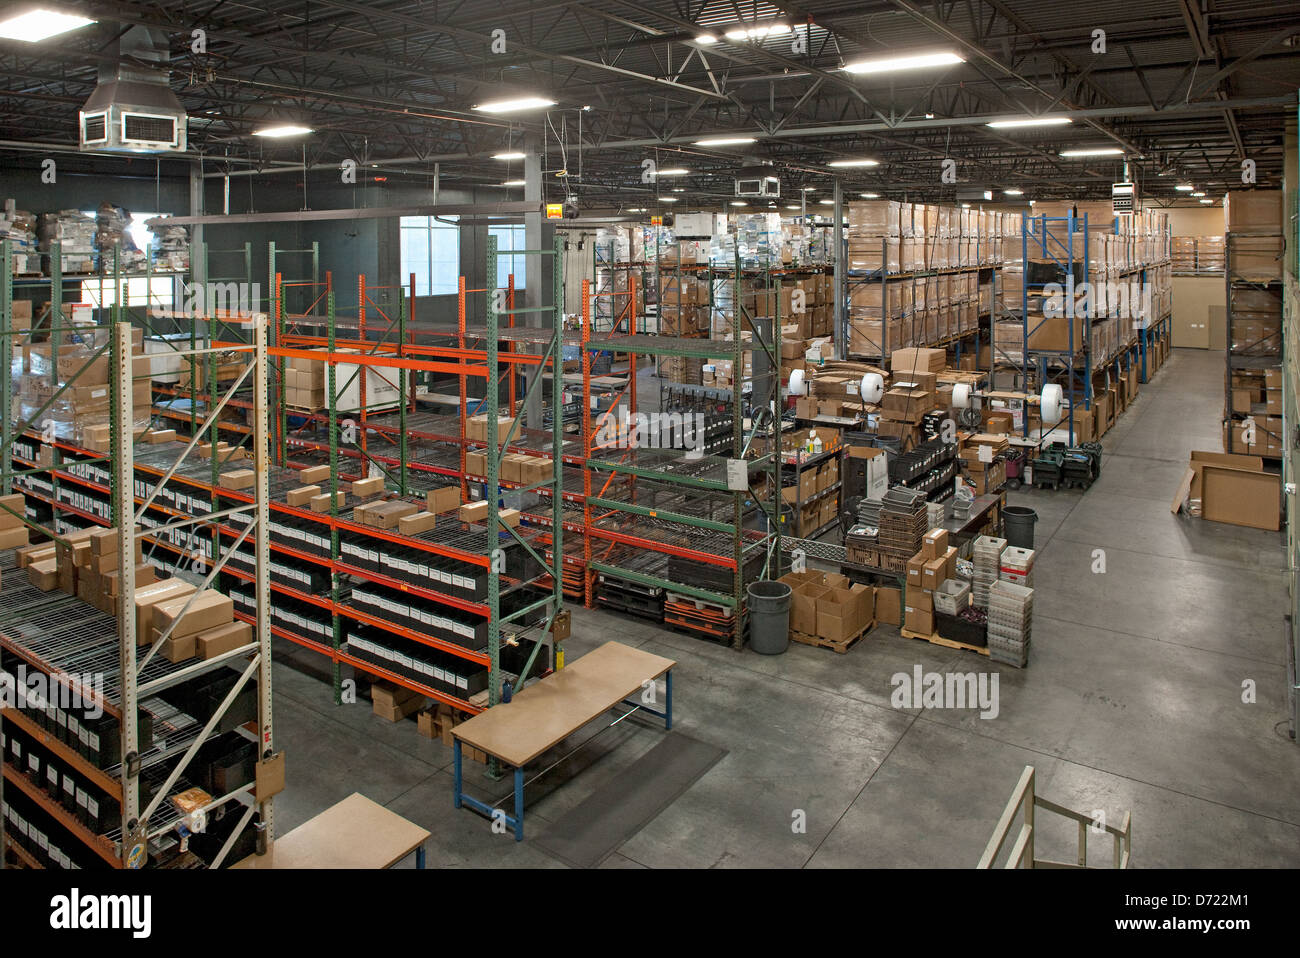 Overhead view of warehouse interior for recycling and refurbishing electronics, inkjet cartridges, and printer toner. Stock Photo